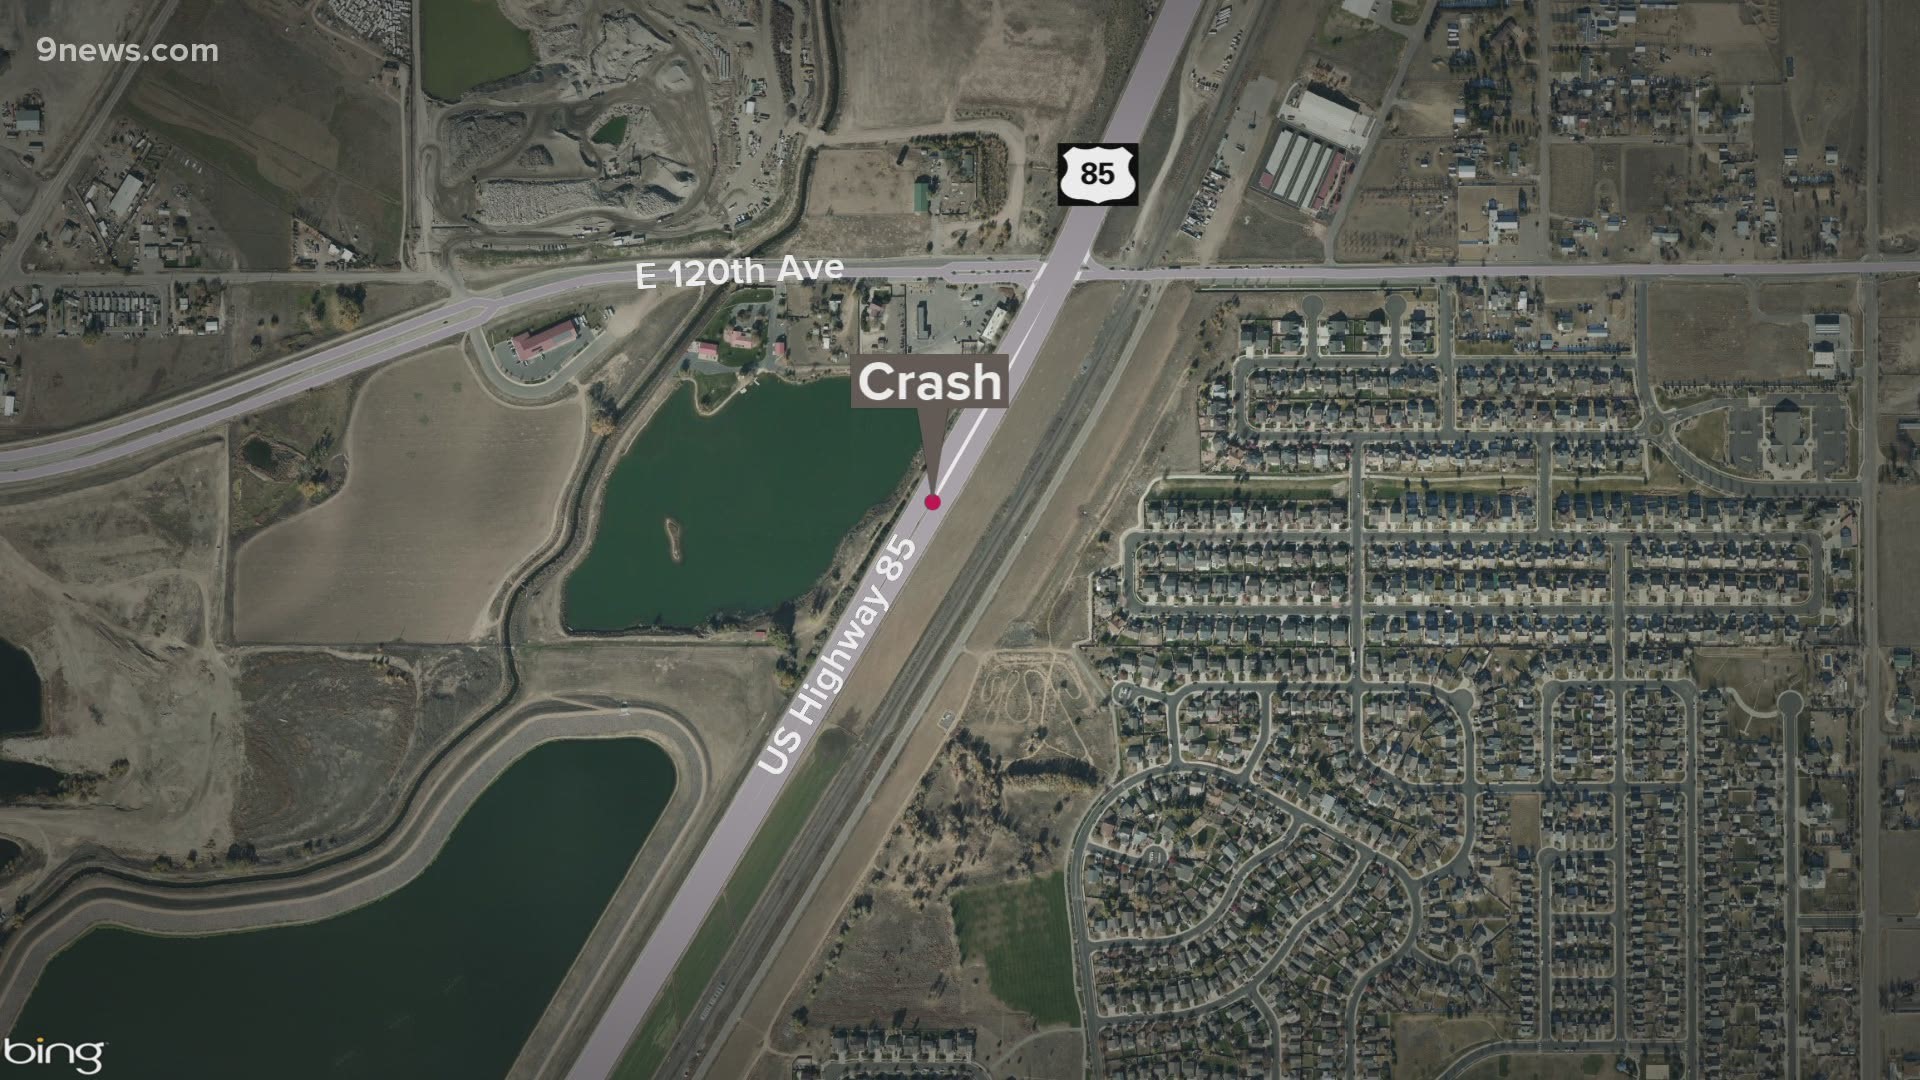 The man was fatally struck on Highway 85 early Friday morning, according to Commerce City Police.